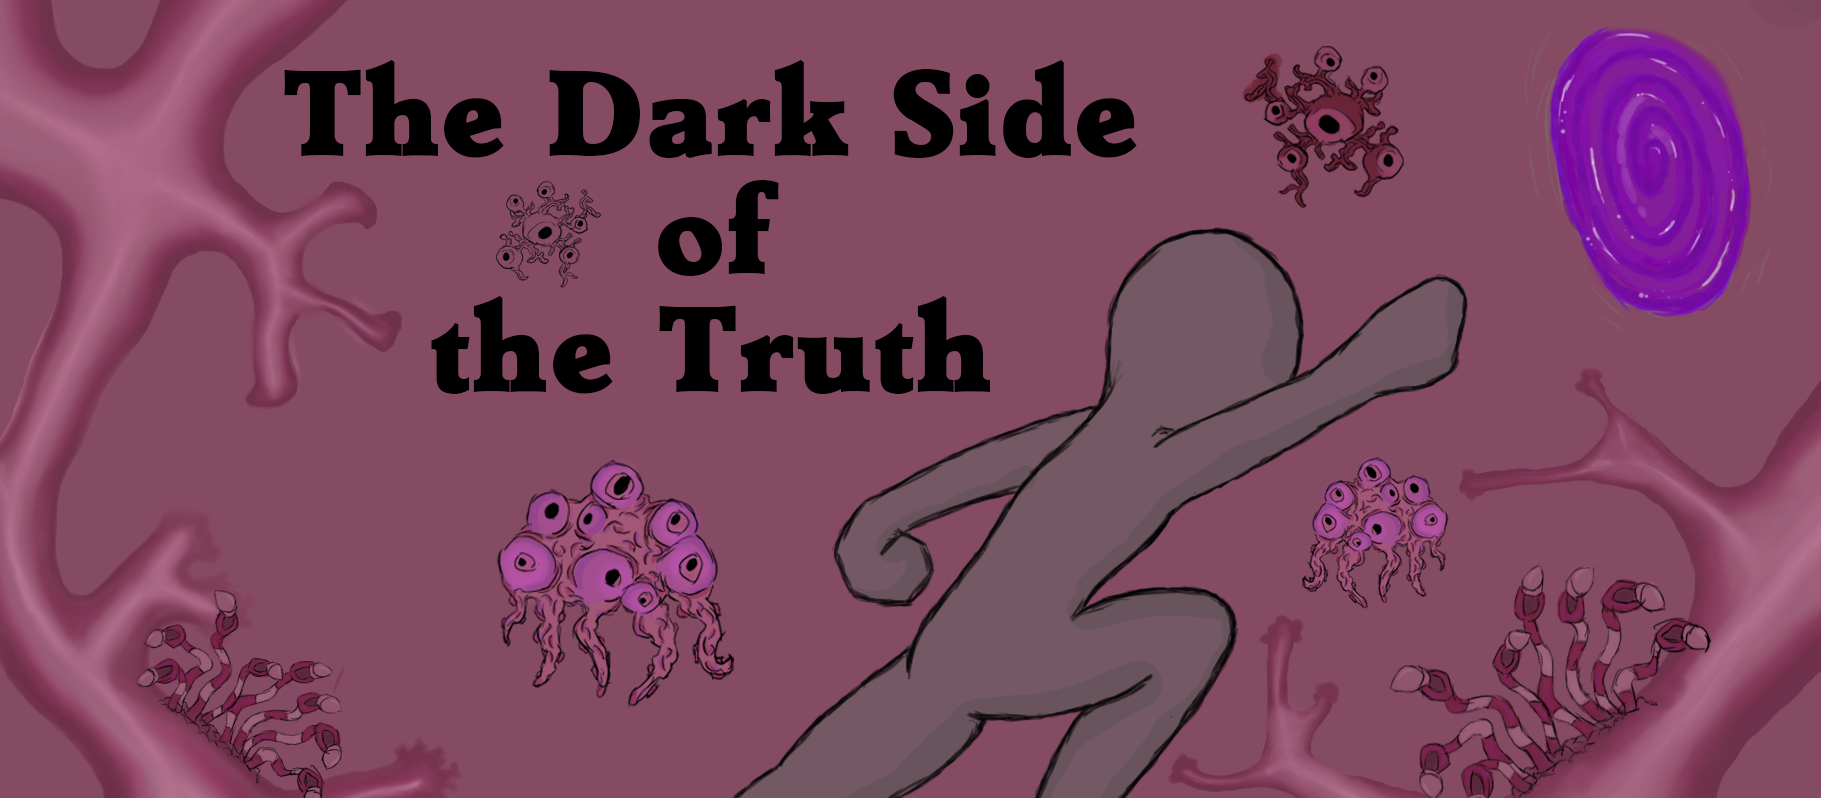 The Dark Side of the Truth